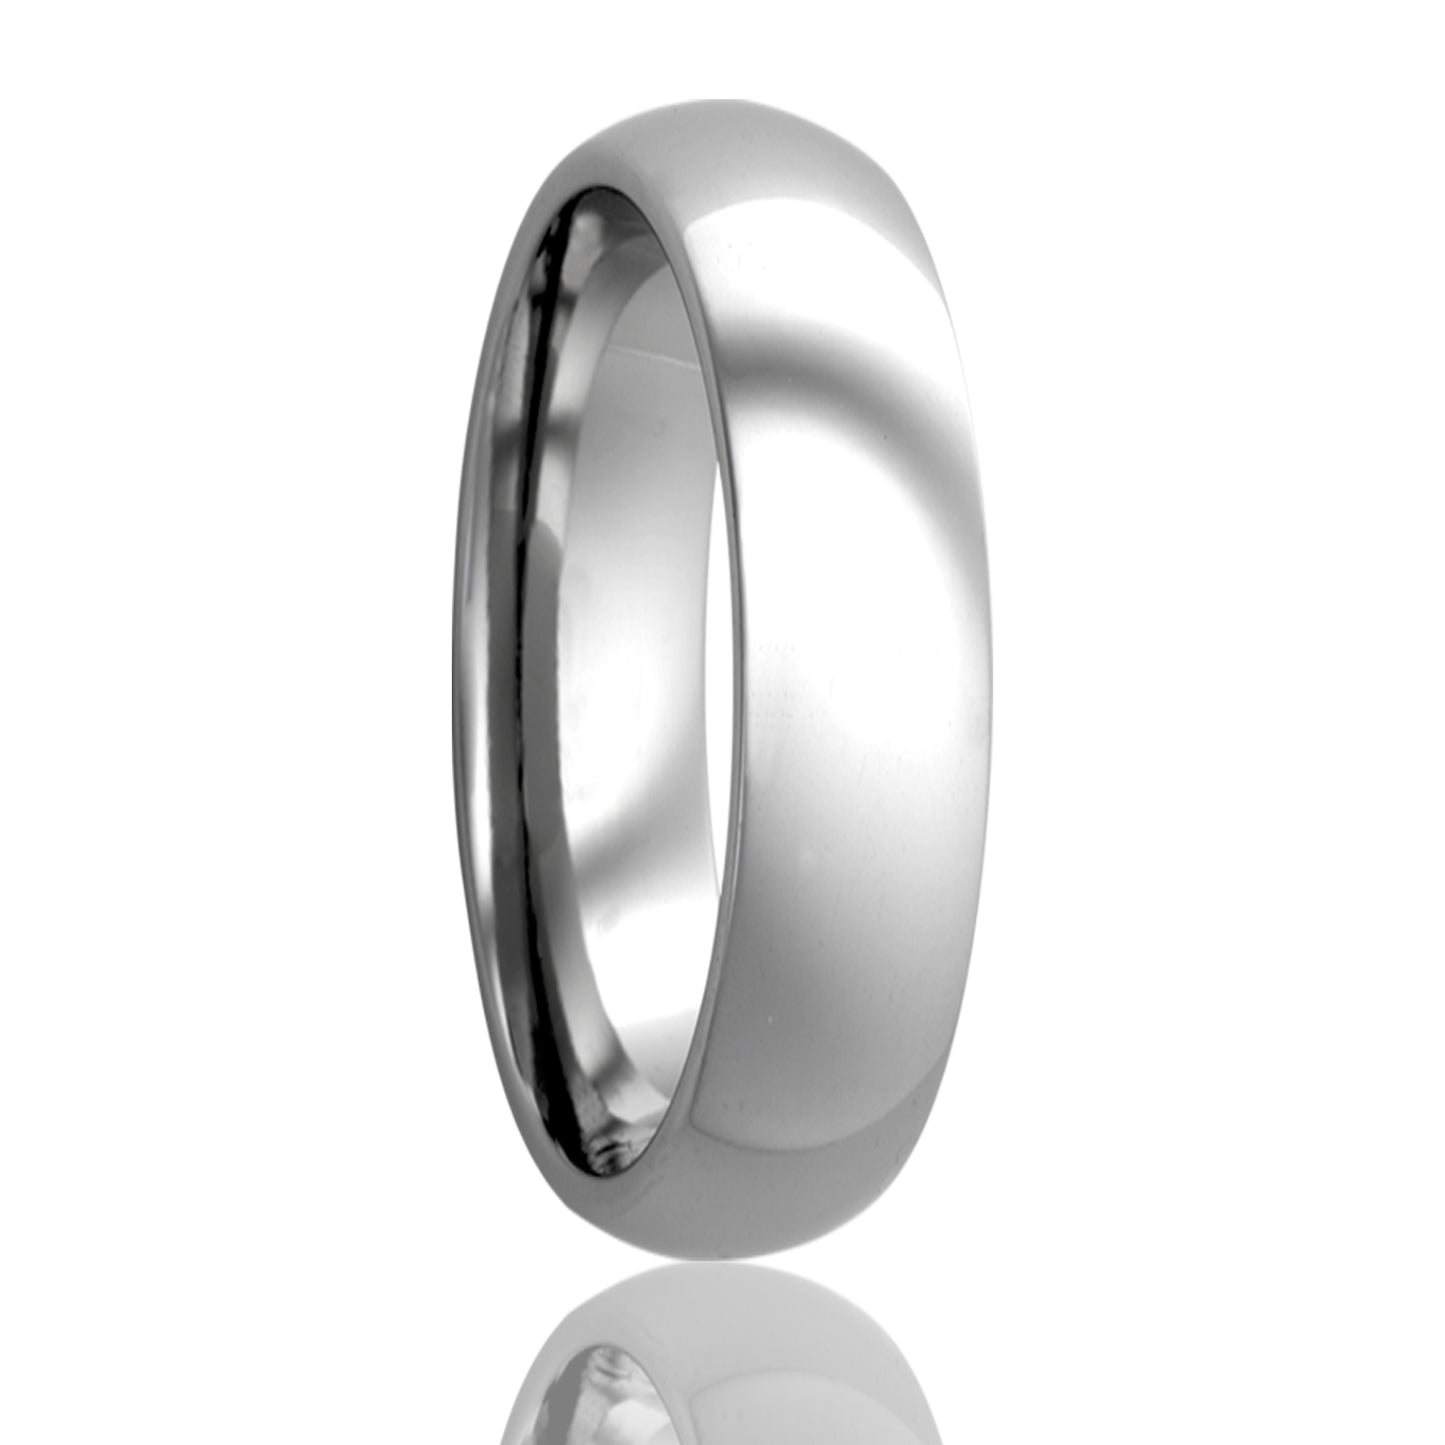 A classic domed cobalt wedding band displayed on a neutral white background.